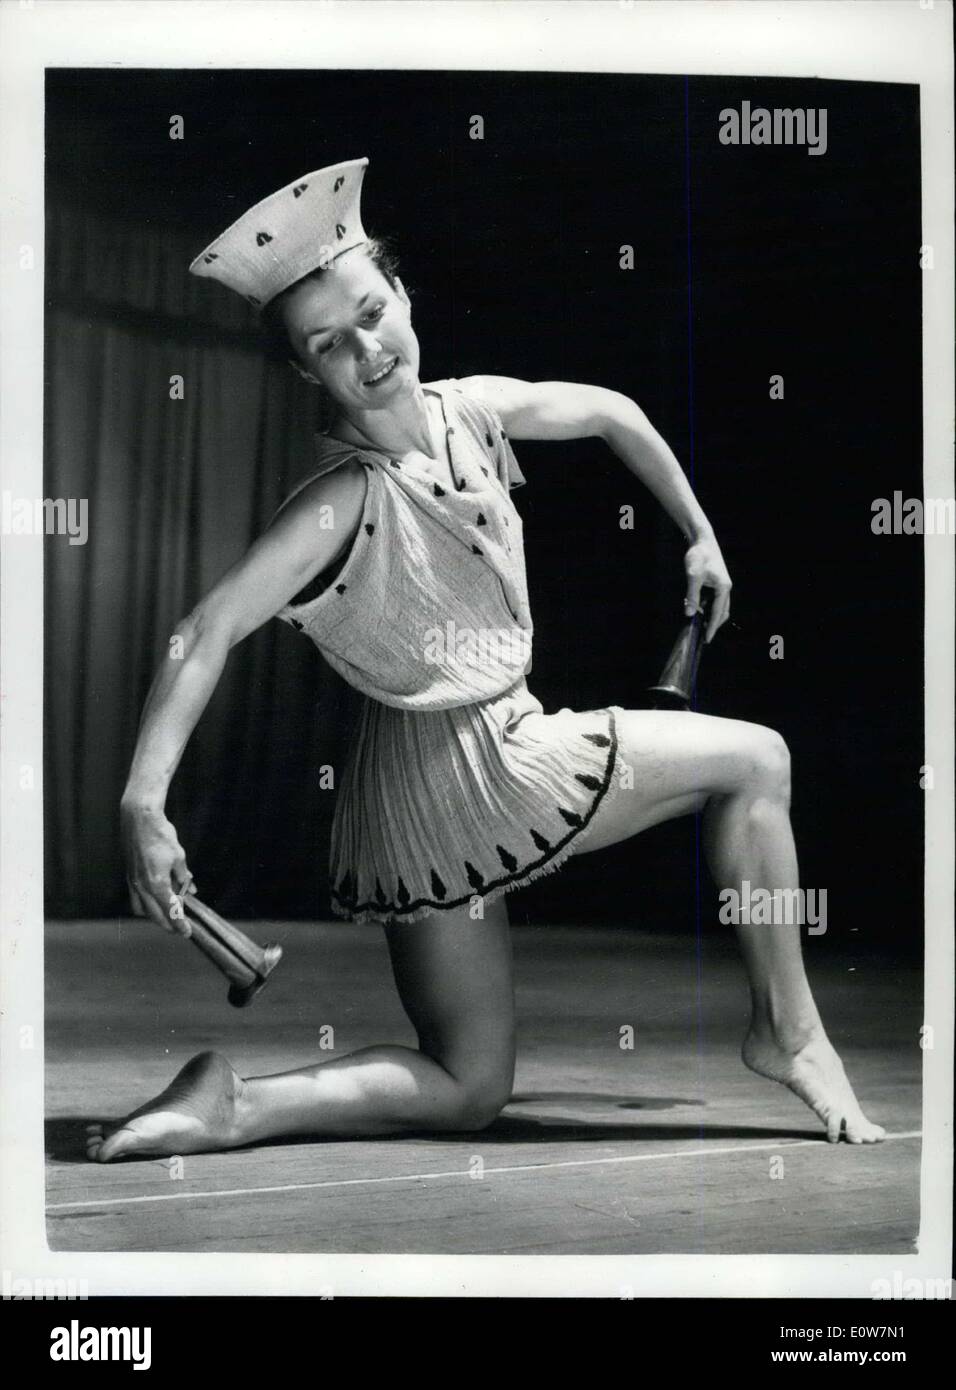 Oct. 27, 1961 - Greek dance recital in London: Joujou Nicoloudi and her group will appear at ta single performance of a Greek Dance Racital at the Rusdolf Steiner Hall, London, on Monday. Rehearsals were held today. Photo shows Joujou Nicoloudi during rehearsal this morning. Stock Photo